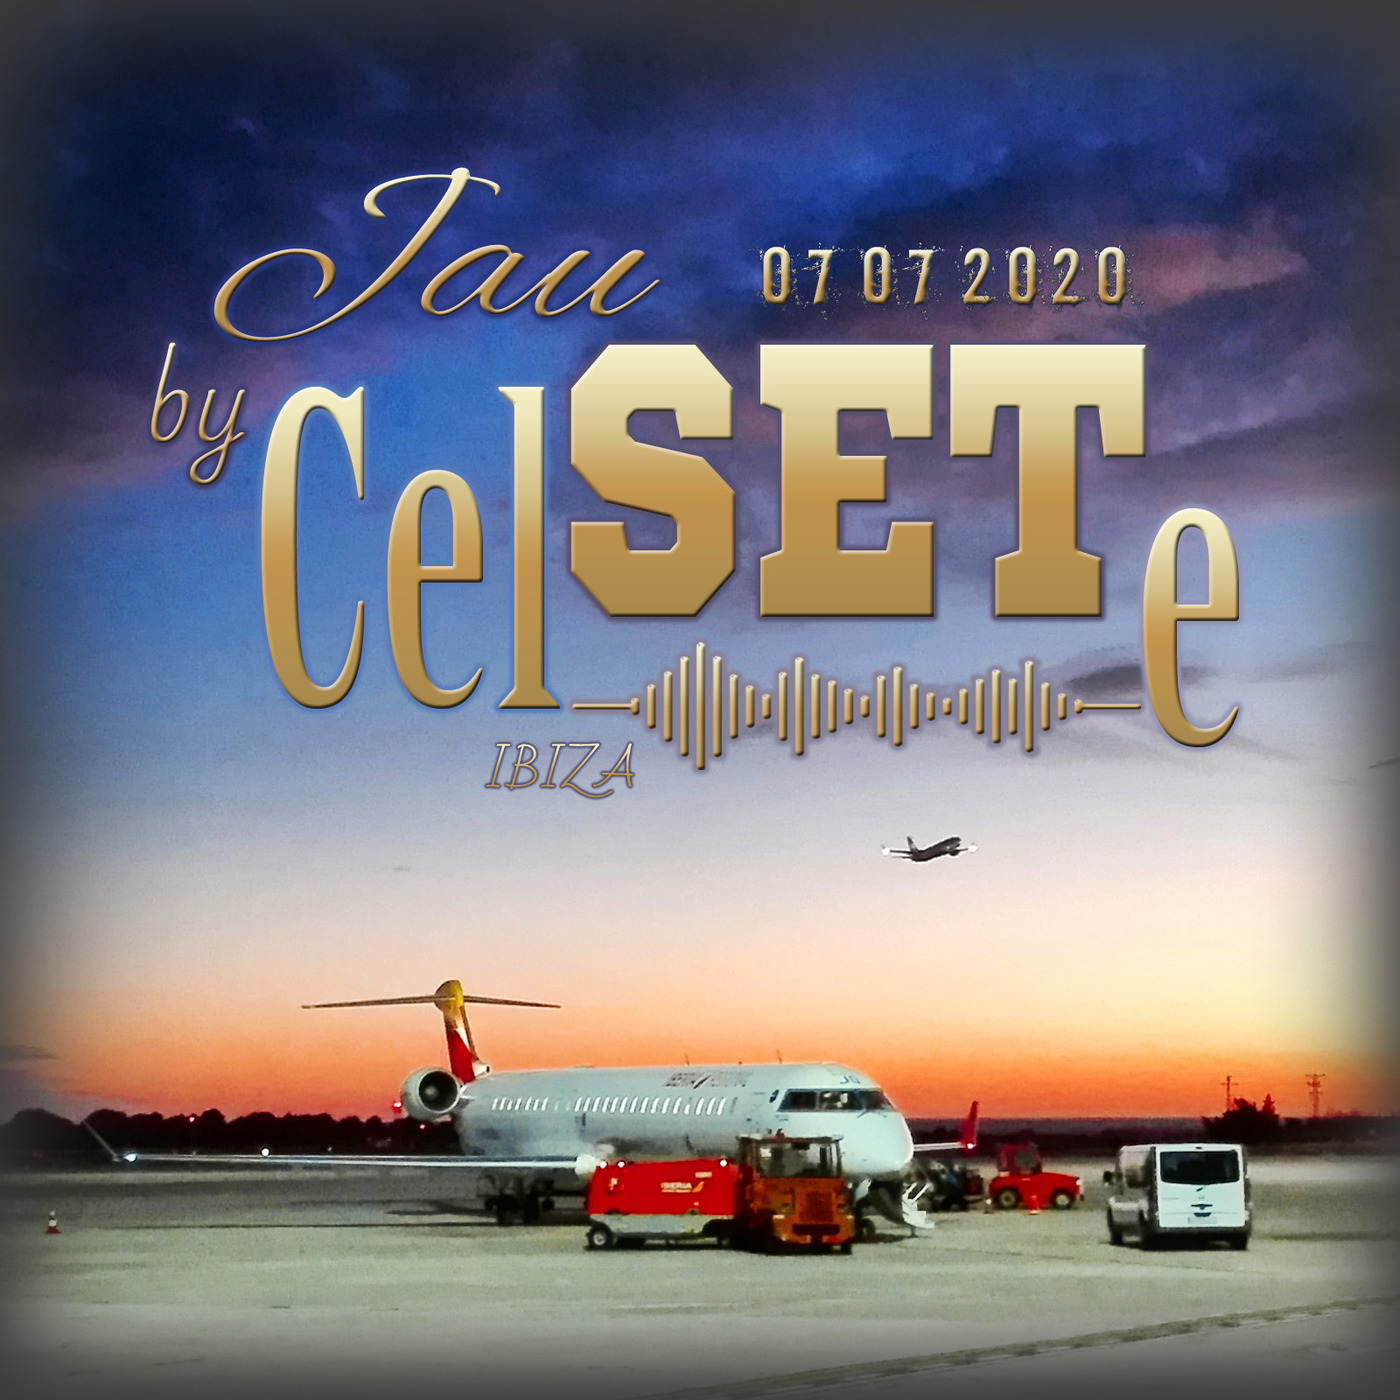 Celso Diaz - Set House Ibiza 07-07-2020 | JauSETe by CELSETE